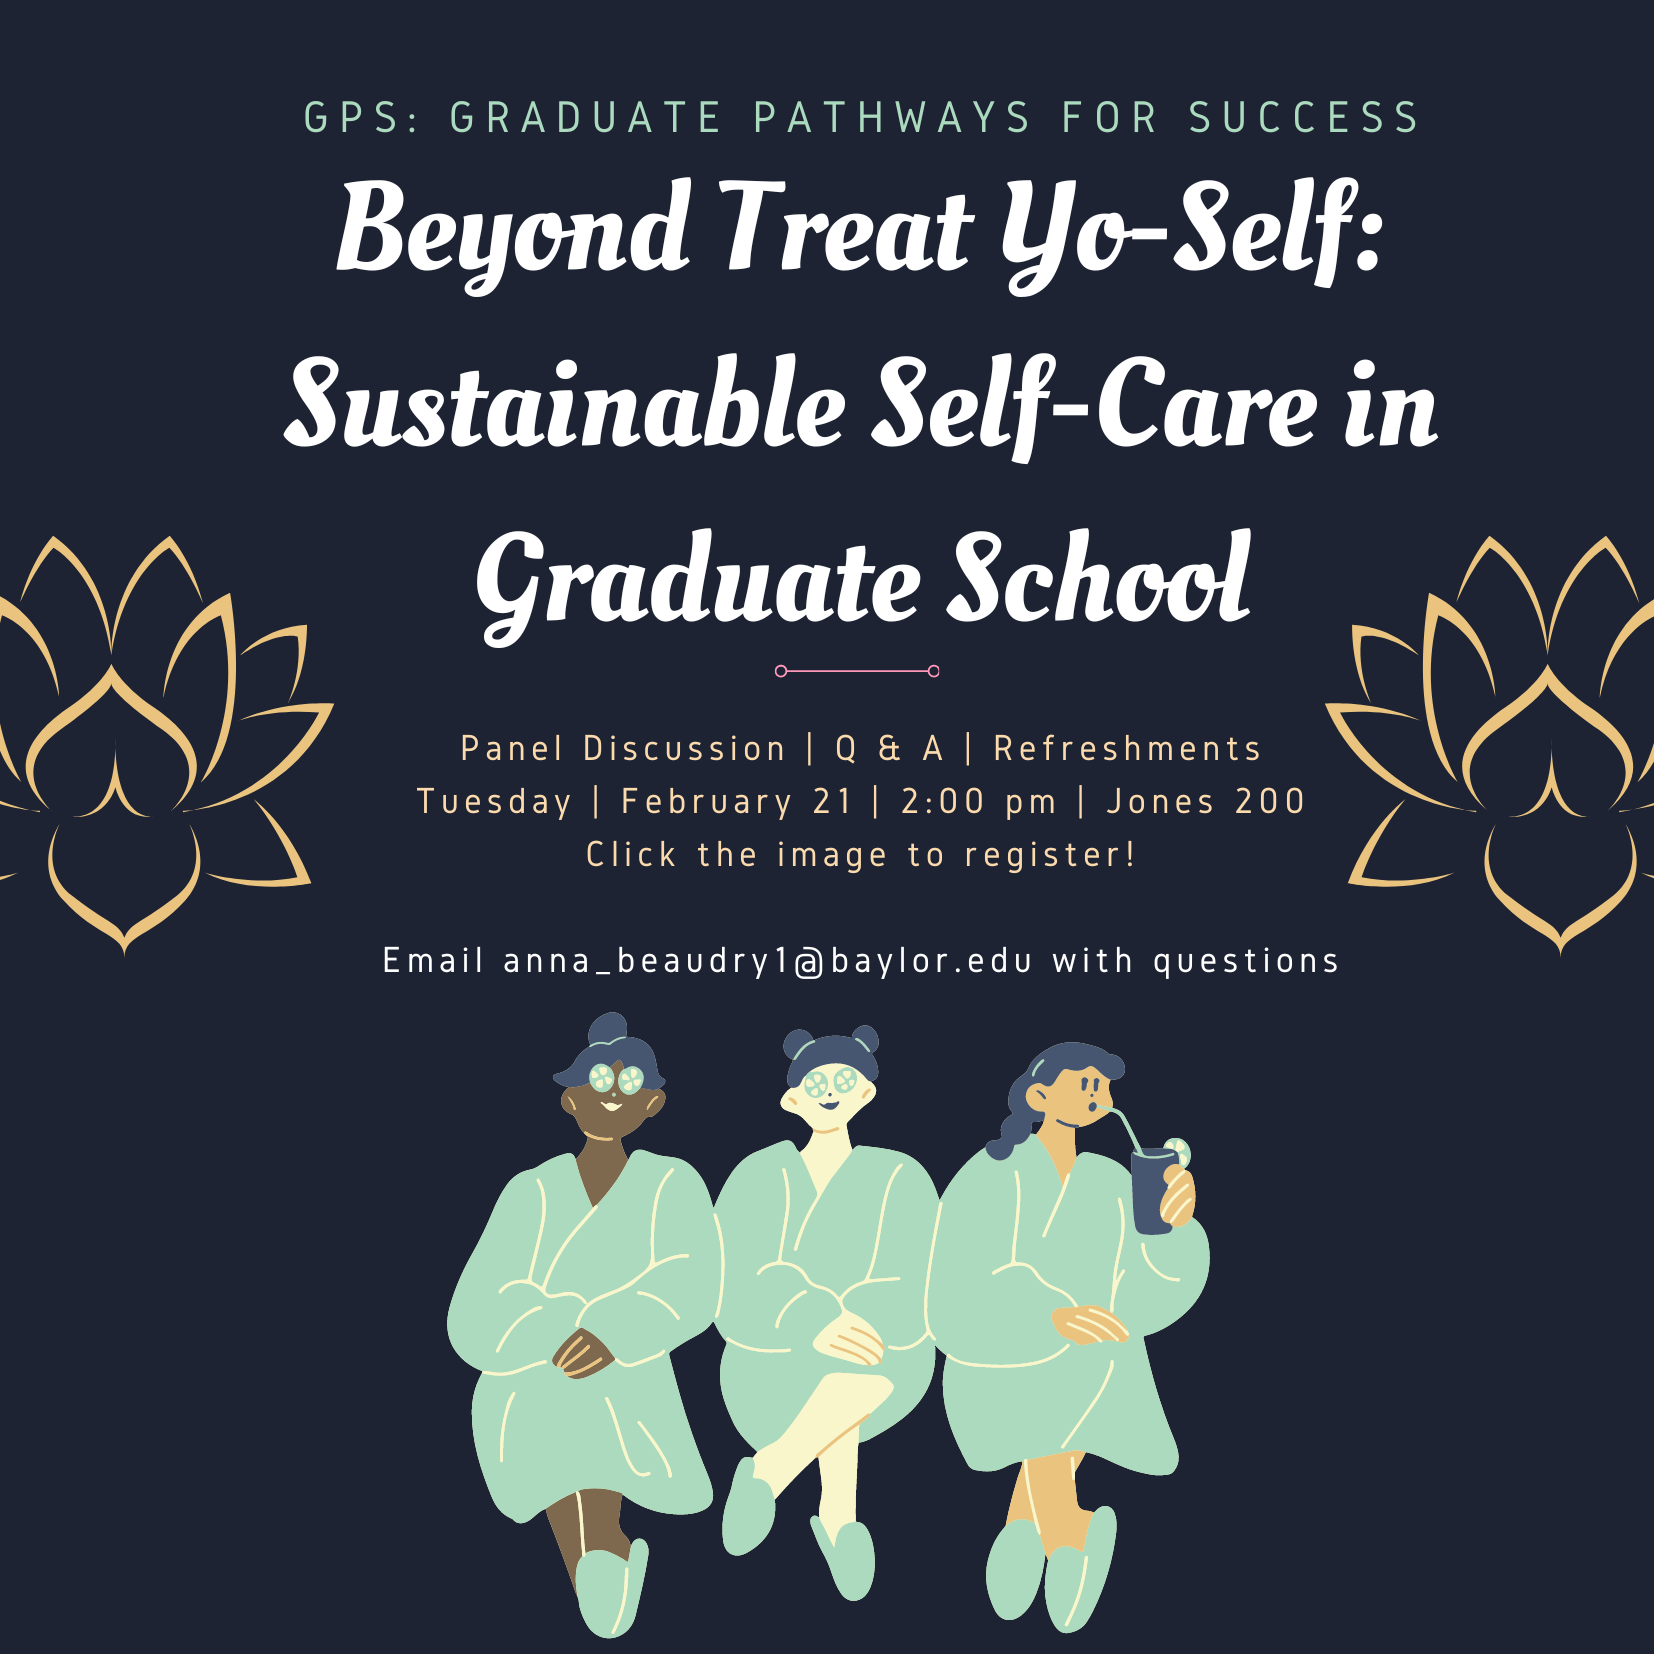 Beyond Treat Yo-Self: Sustainable Self-Care in Graduate School Beyond Treat Yo-Self: Sustainable Self-Care in Graduate School Panel Discussion | Q & A | Refreshments Tuesday | February 21 | 2:00 pm | Jones 200 Click the image to register! Email anna_beaudry1@baylor.edu with questions